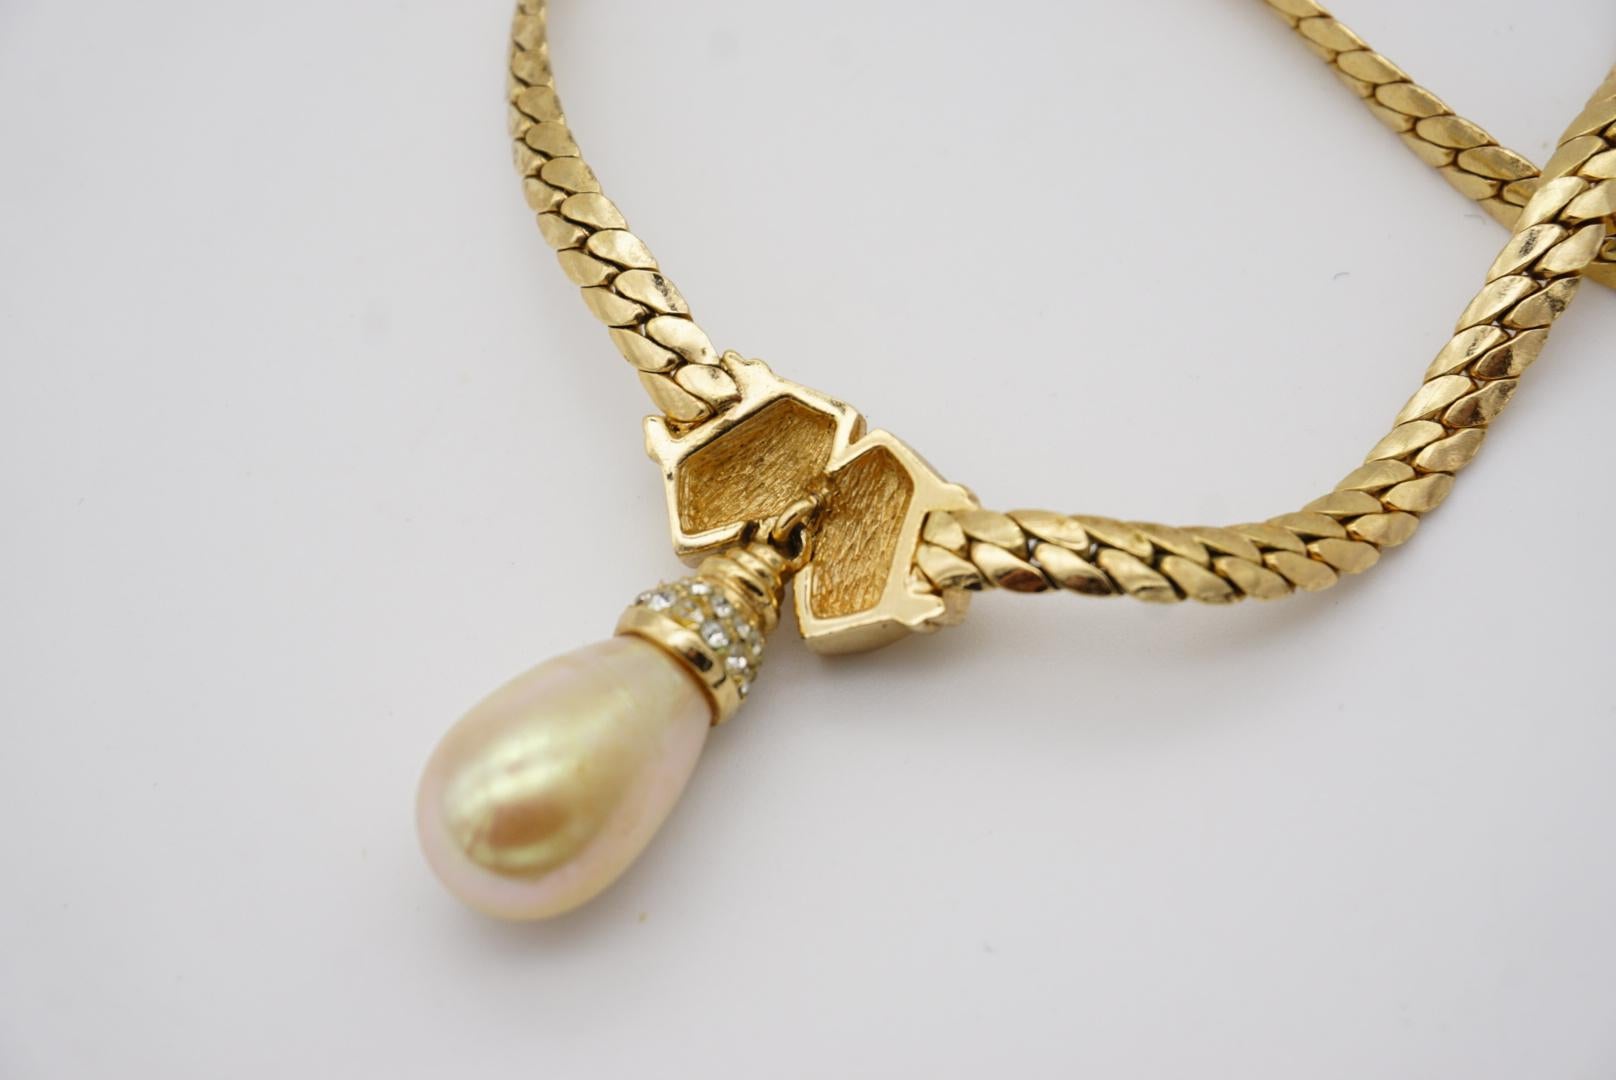 Christian Dior Vintage 1980s Faux Crystals Pearl Teardrop Gold Pendant Necklace For Sale 2